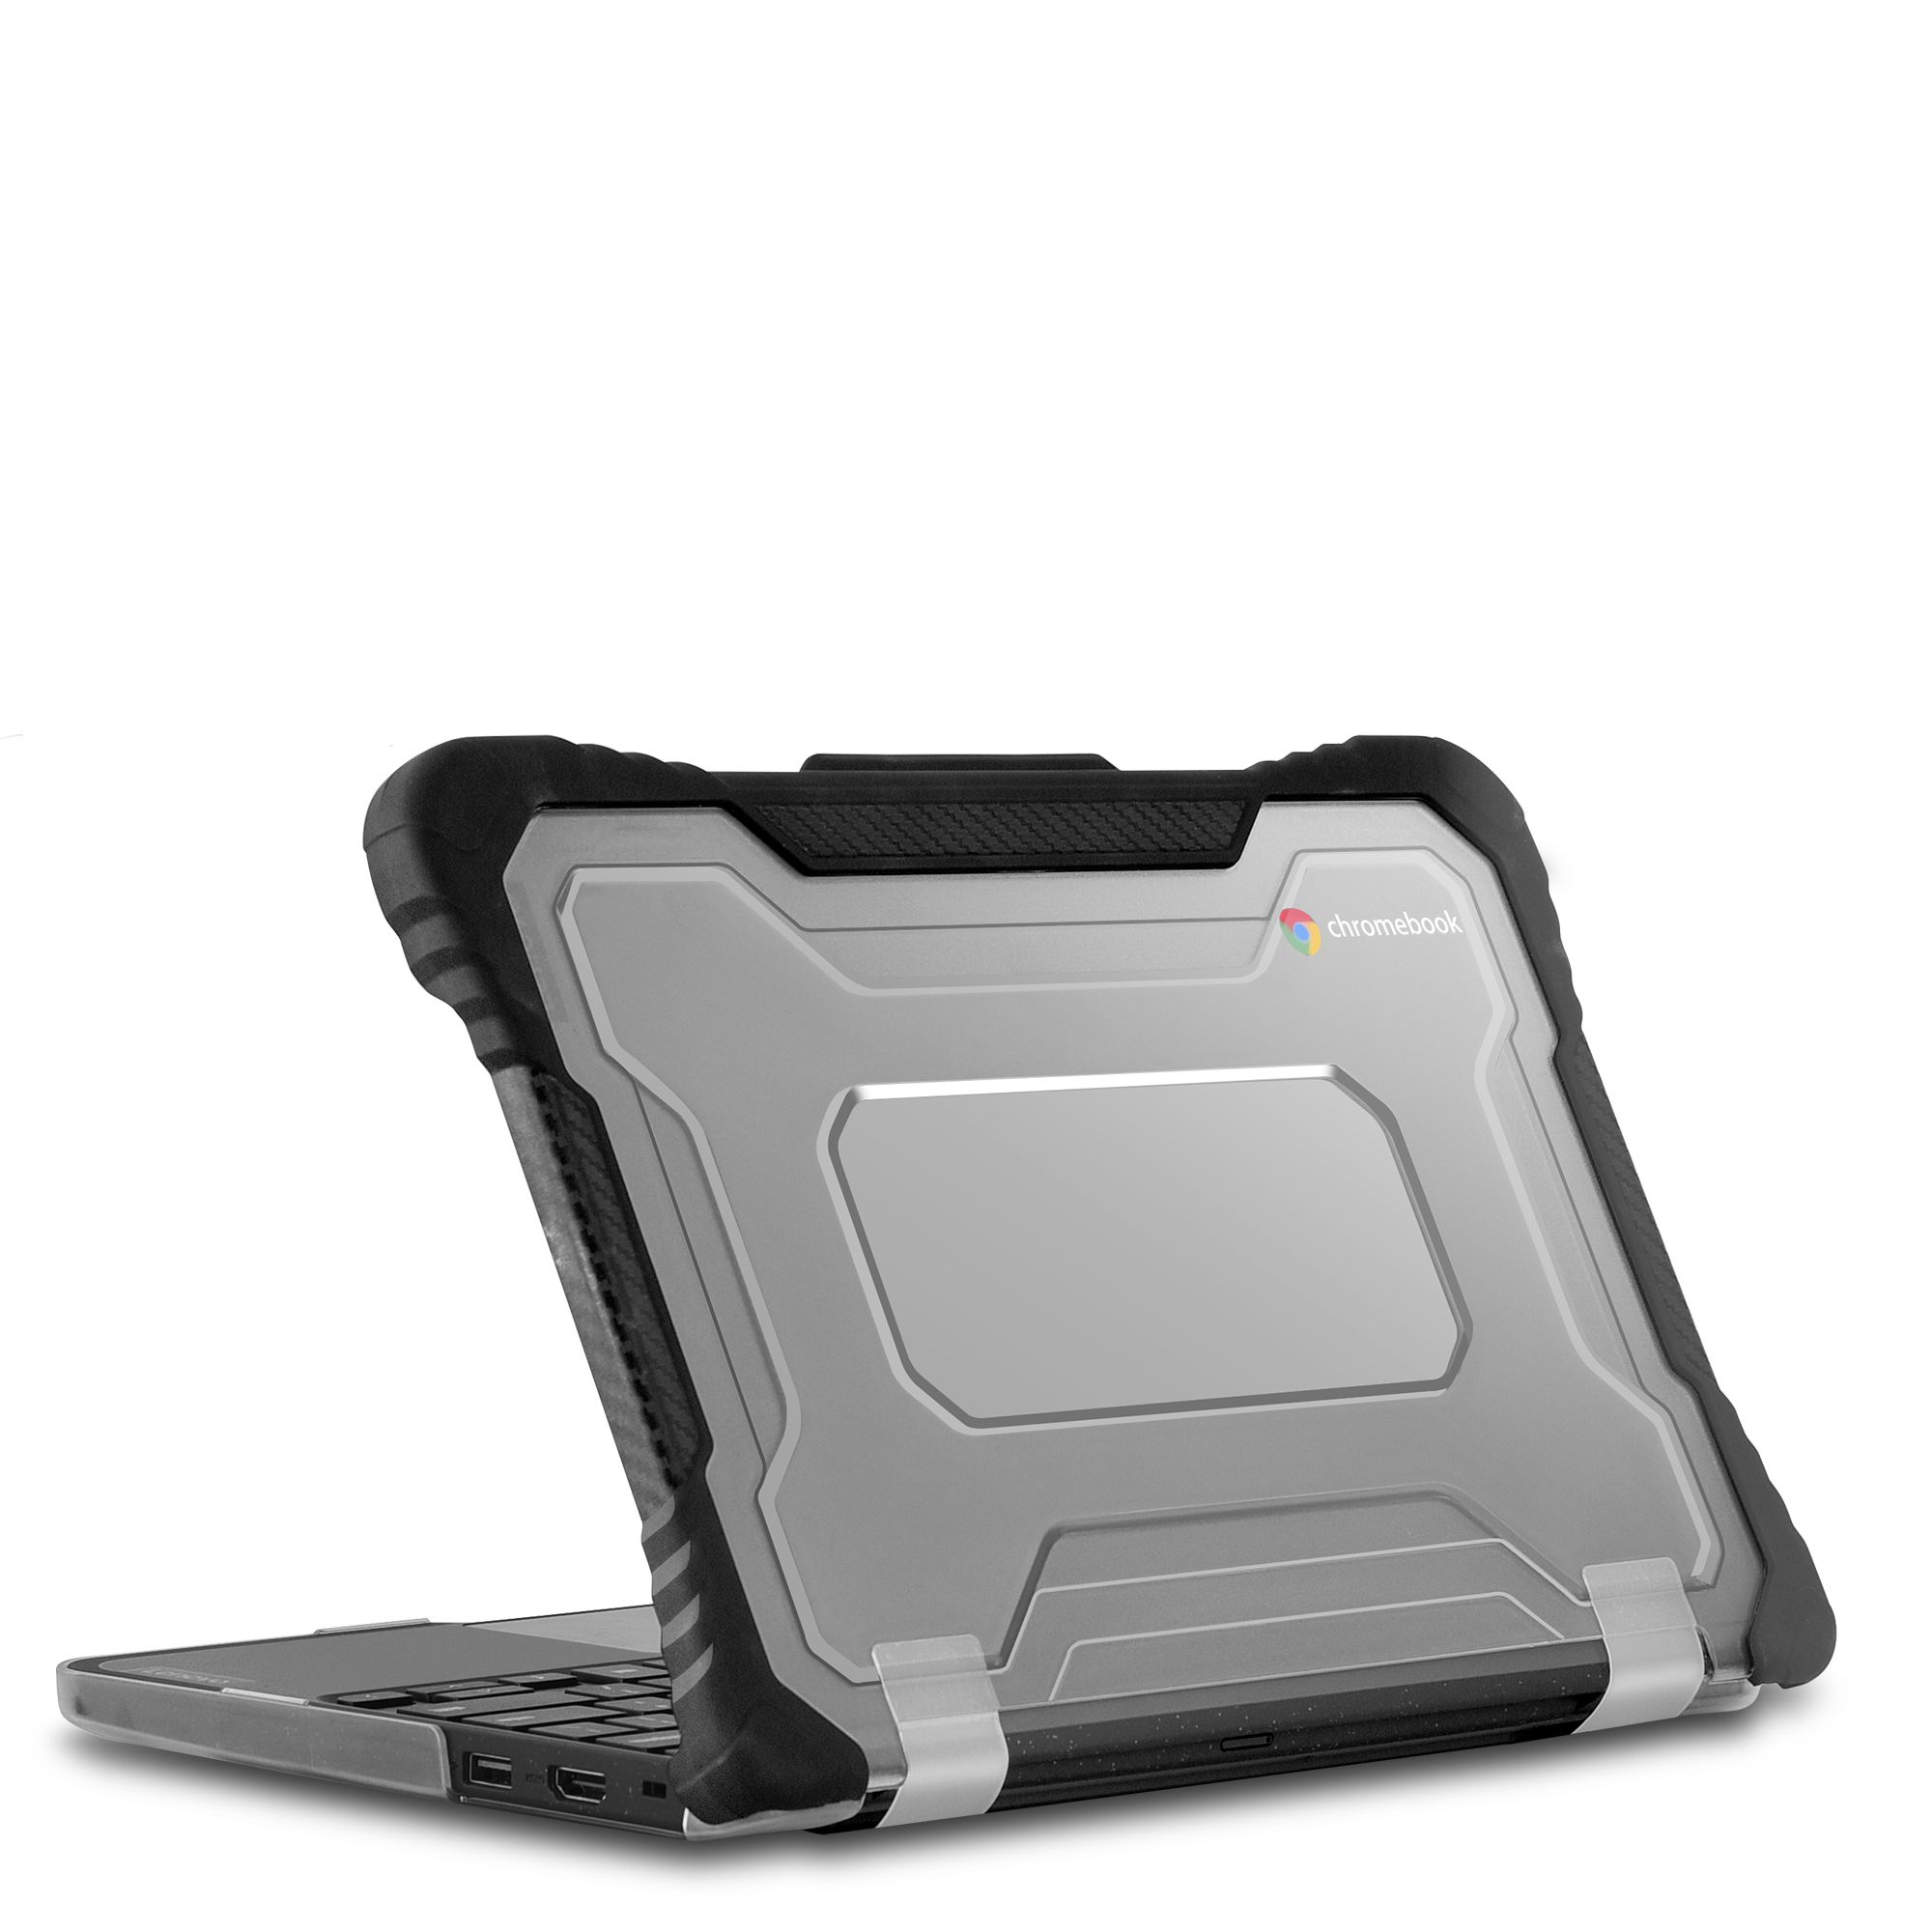 TACHS002 TECH AIR Classic pro - Notebook shell case - form fitting - clear - for Lenovo 100e Chromebook Gen 3